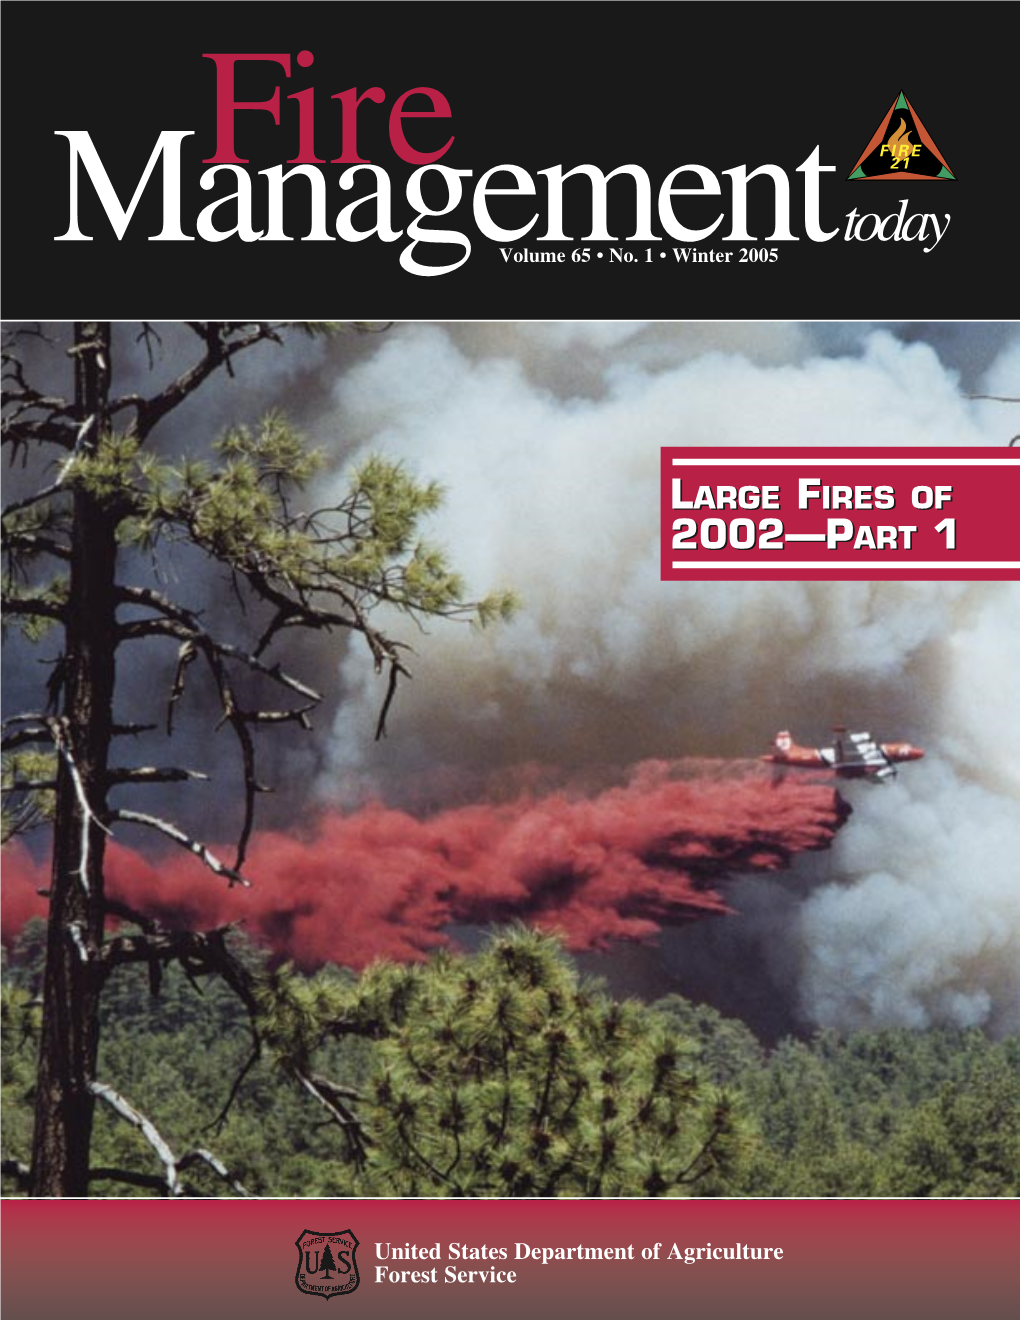 Fire Management Today Volume 62(3), the Article “Thirtymile Fire: Fire Behavior and Management Response” by Hutch Brown Made Some Incor- Rect Statements